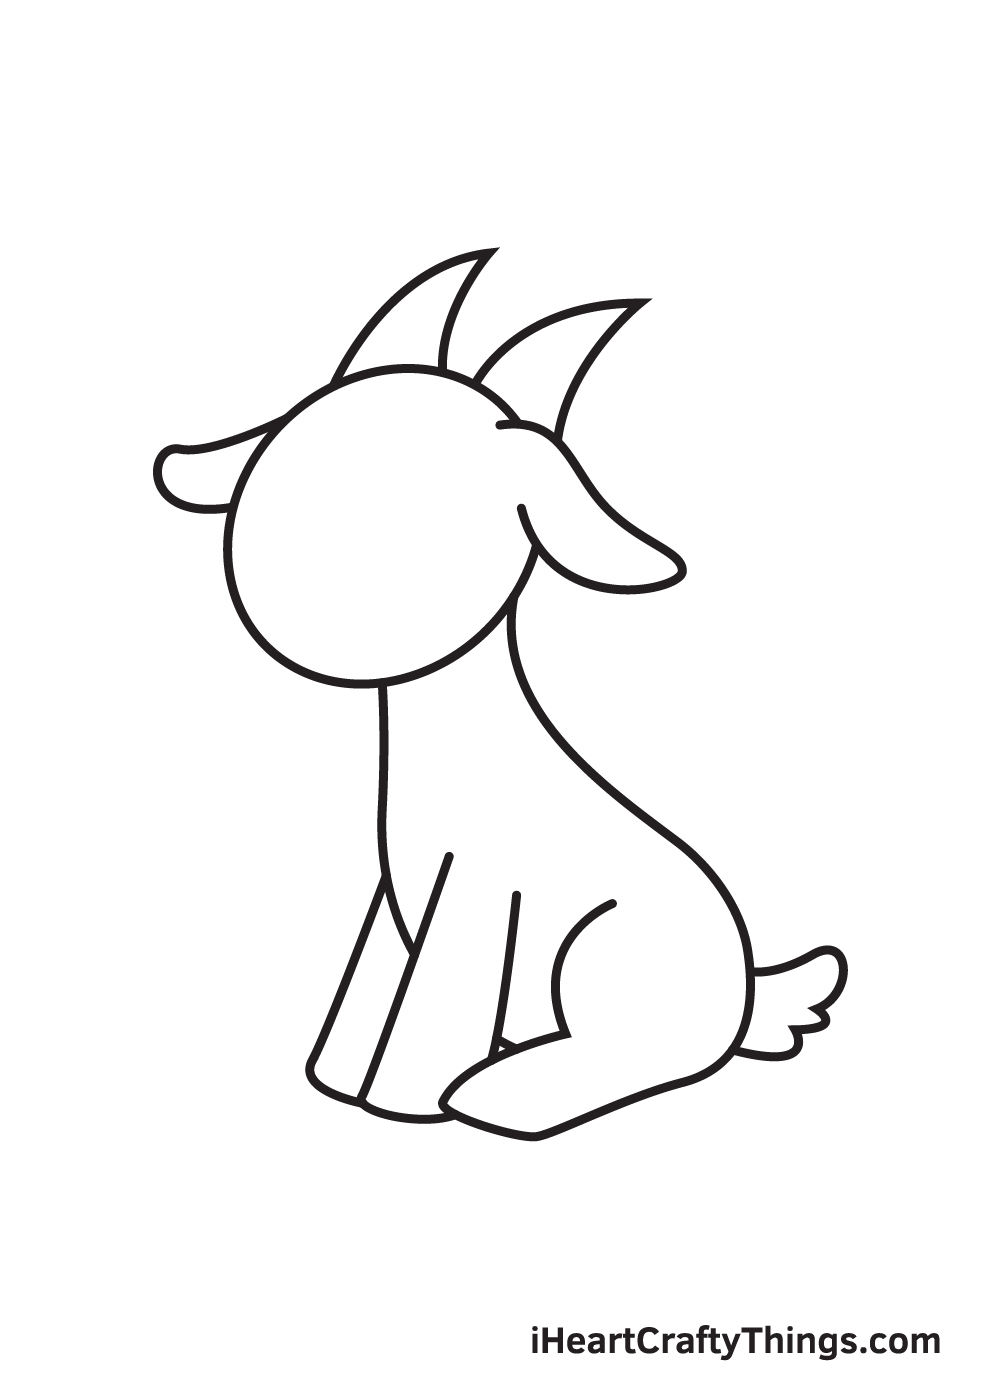 goat drawing - step 7